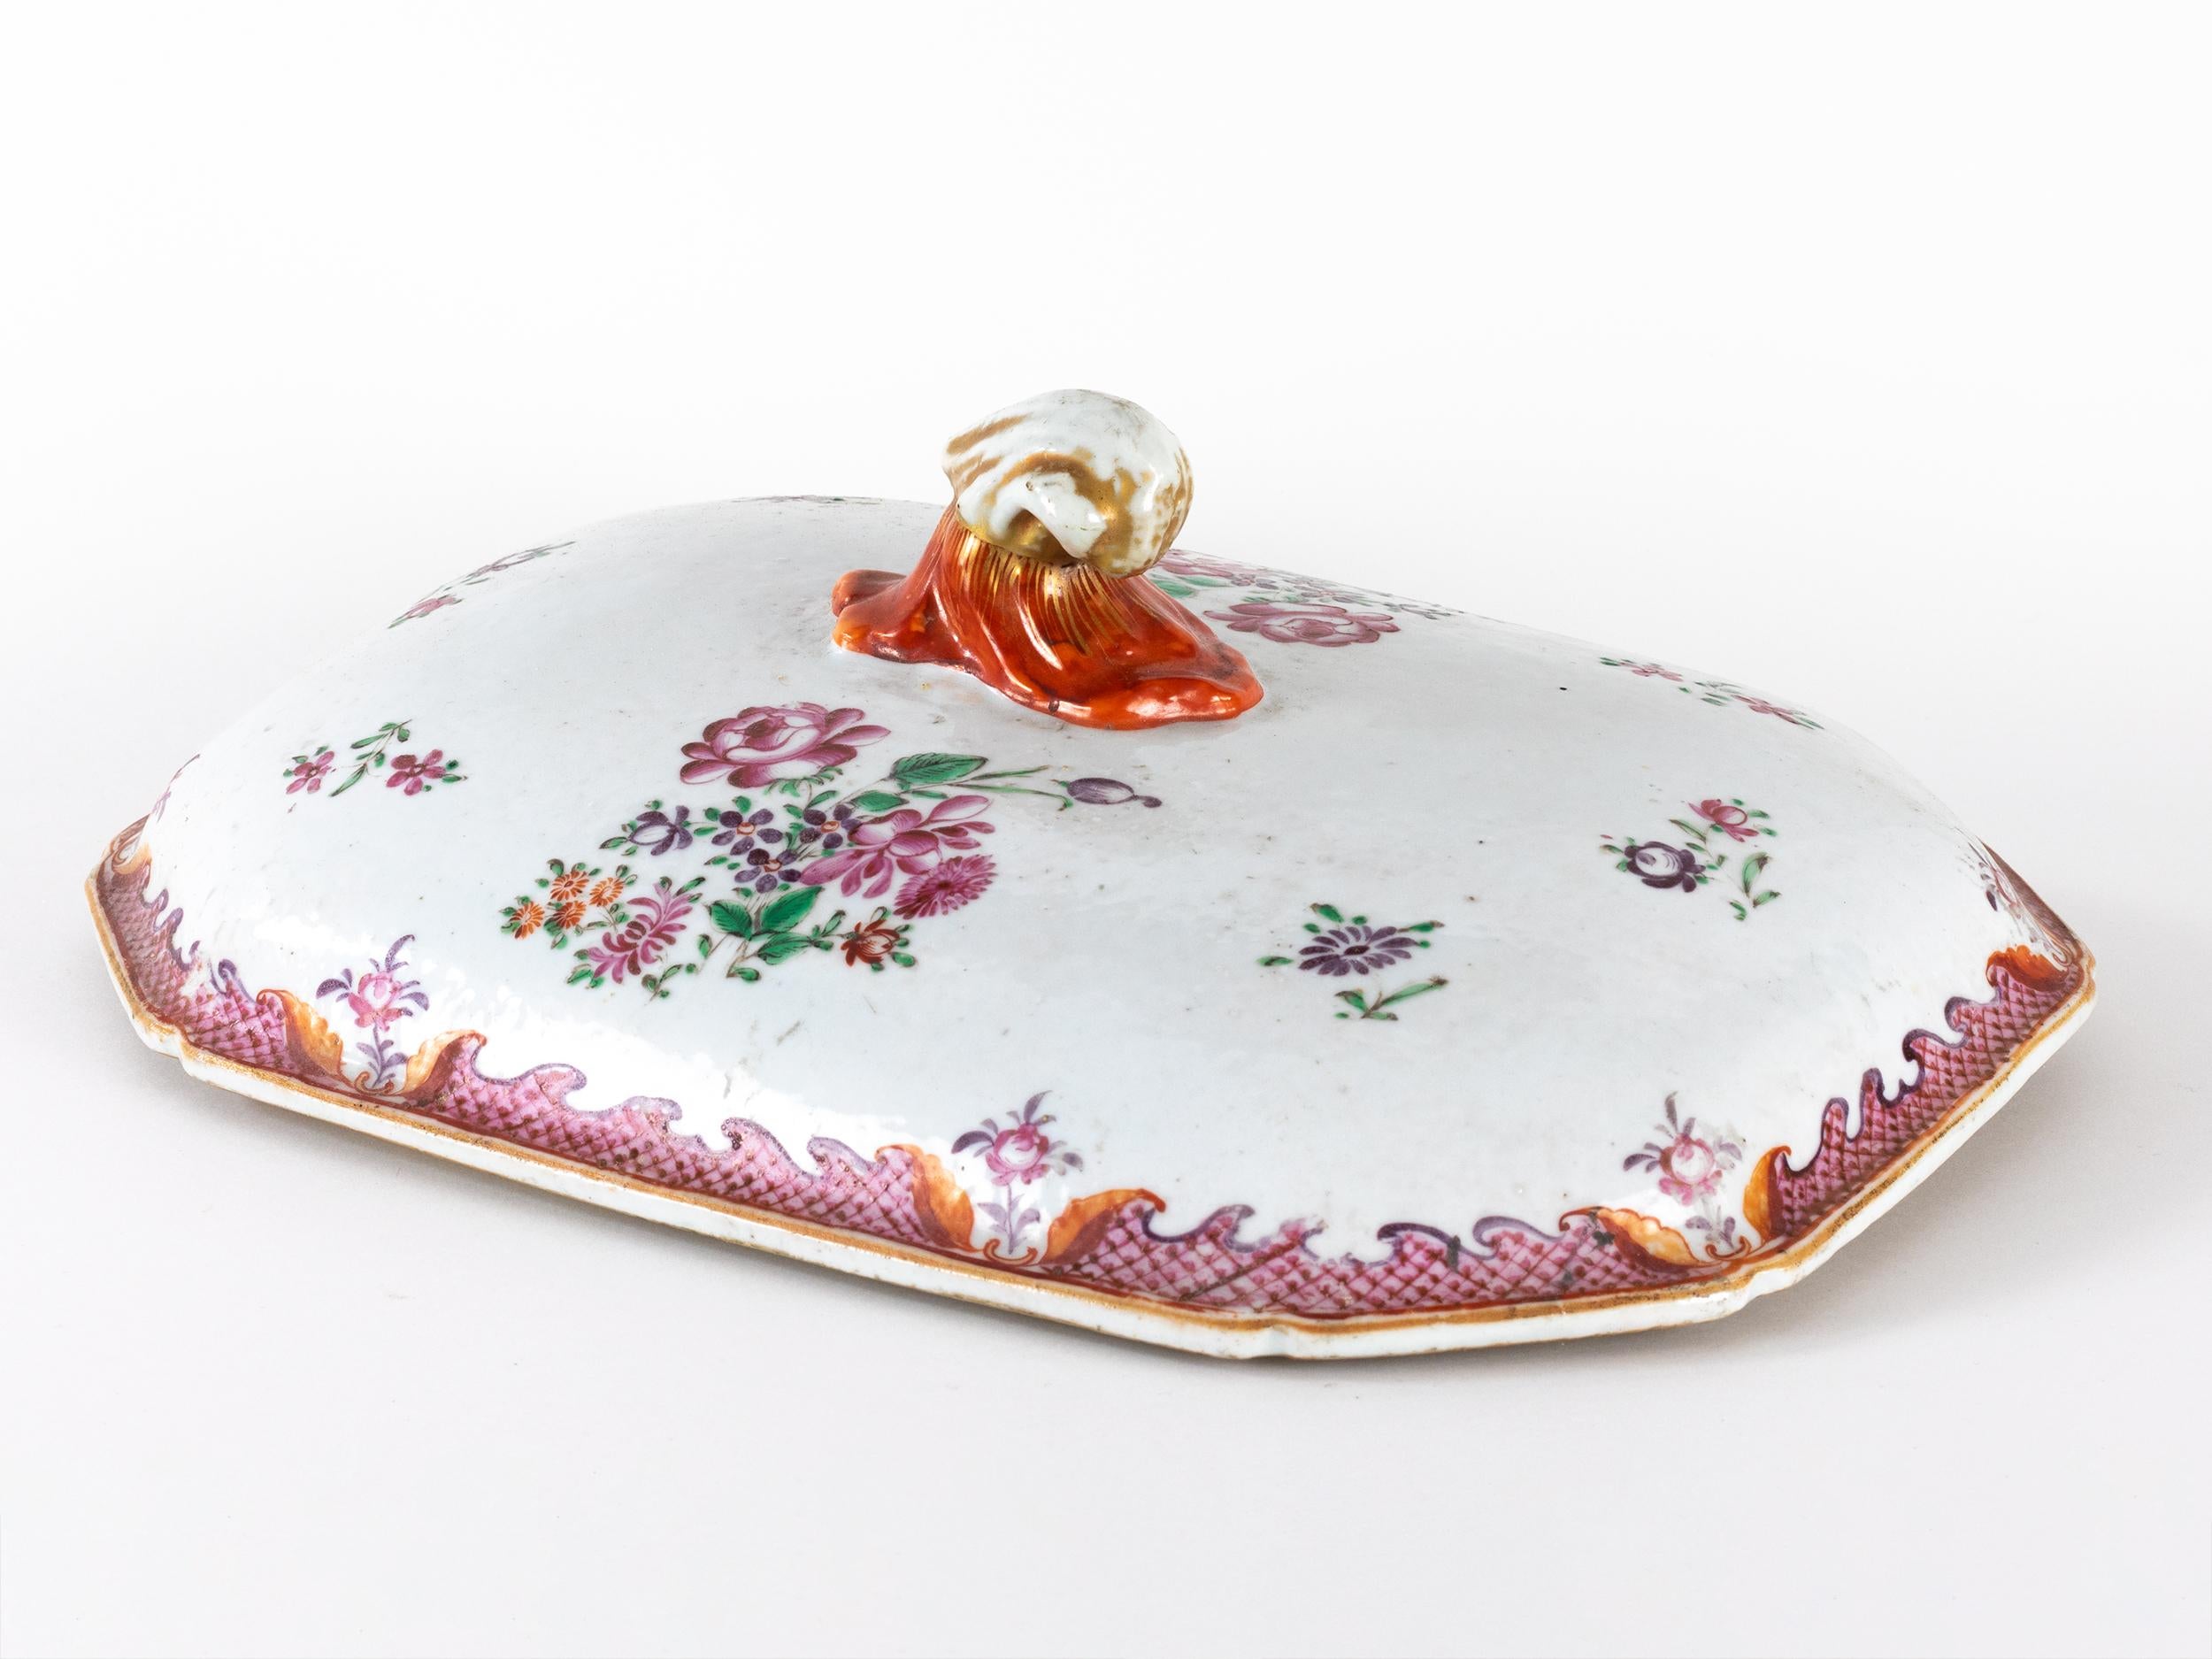 18th Century and Earlier 18th Century Porcelain Tureen Lid by Portuguese India Company For Sale